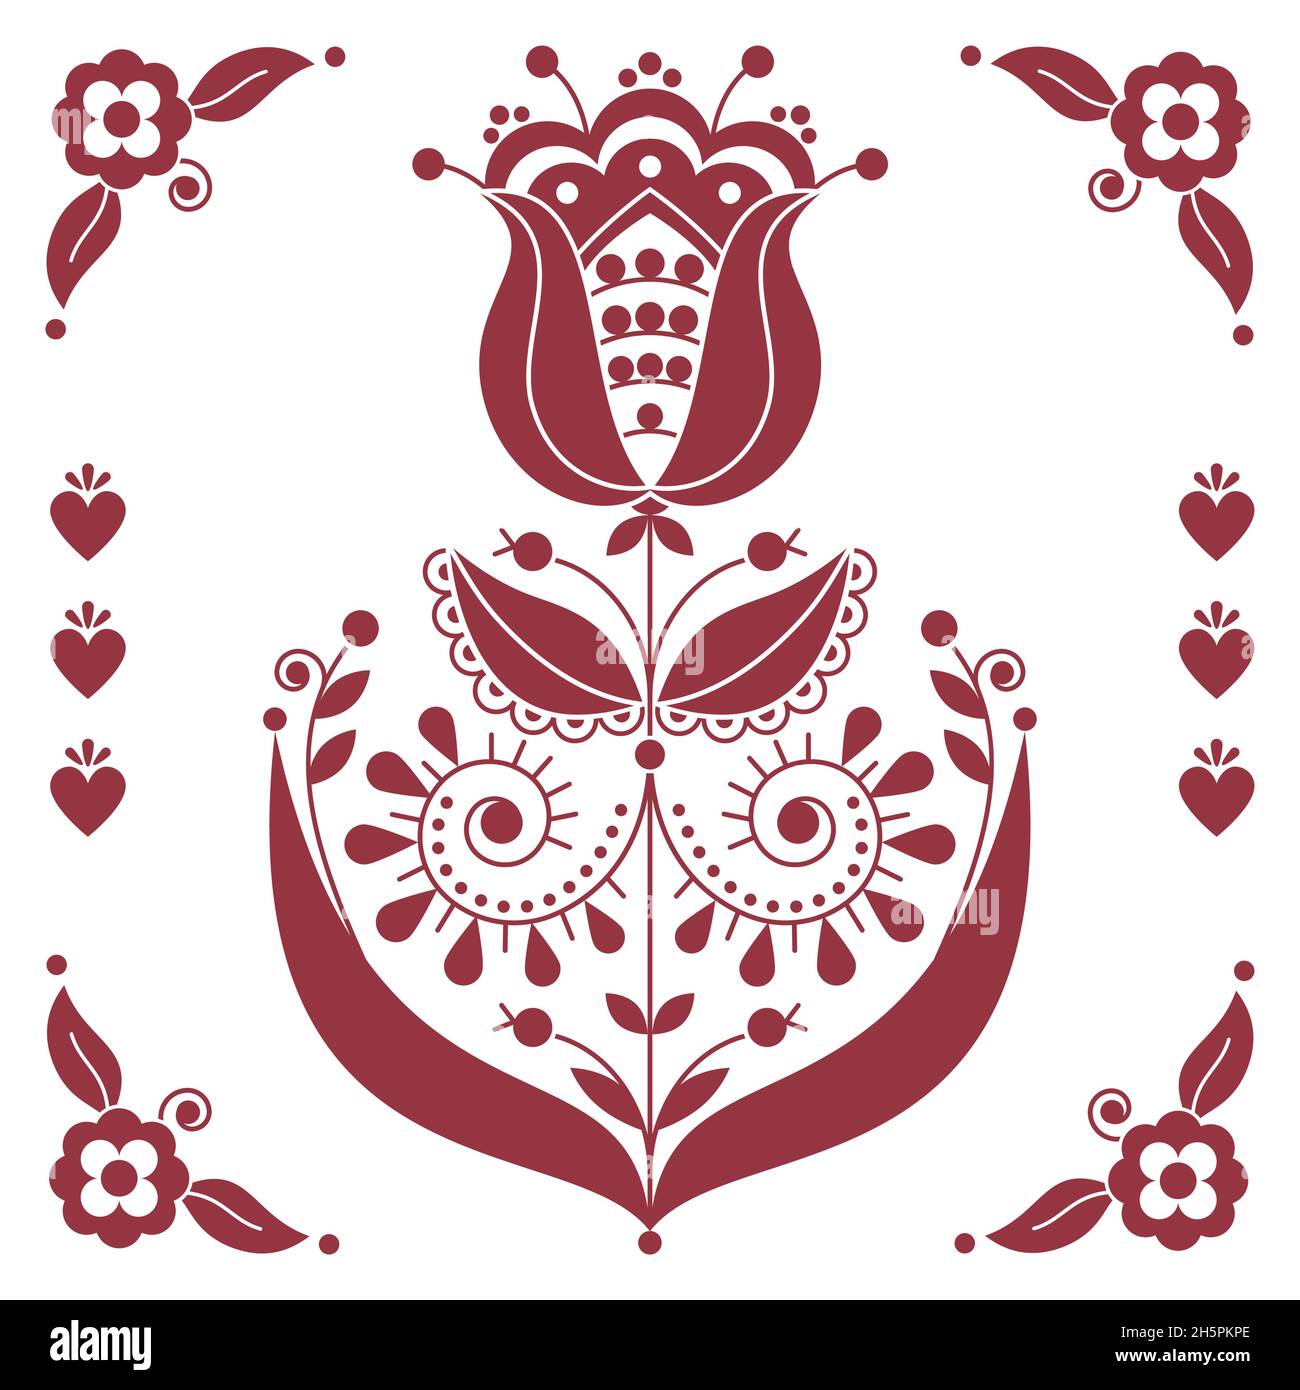 Scandinavian folk art flower vector greeting card design with brown flower and coners, retro floral patterns inspired by the traditional embroidery fr Stock Vector